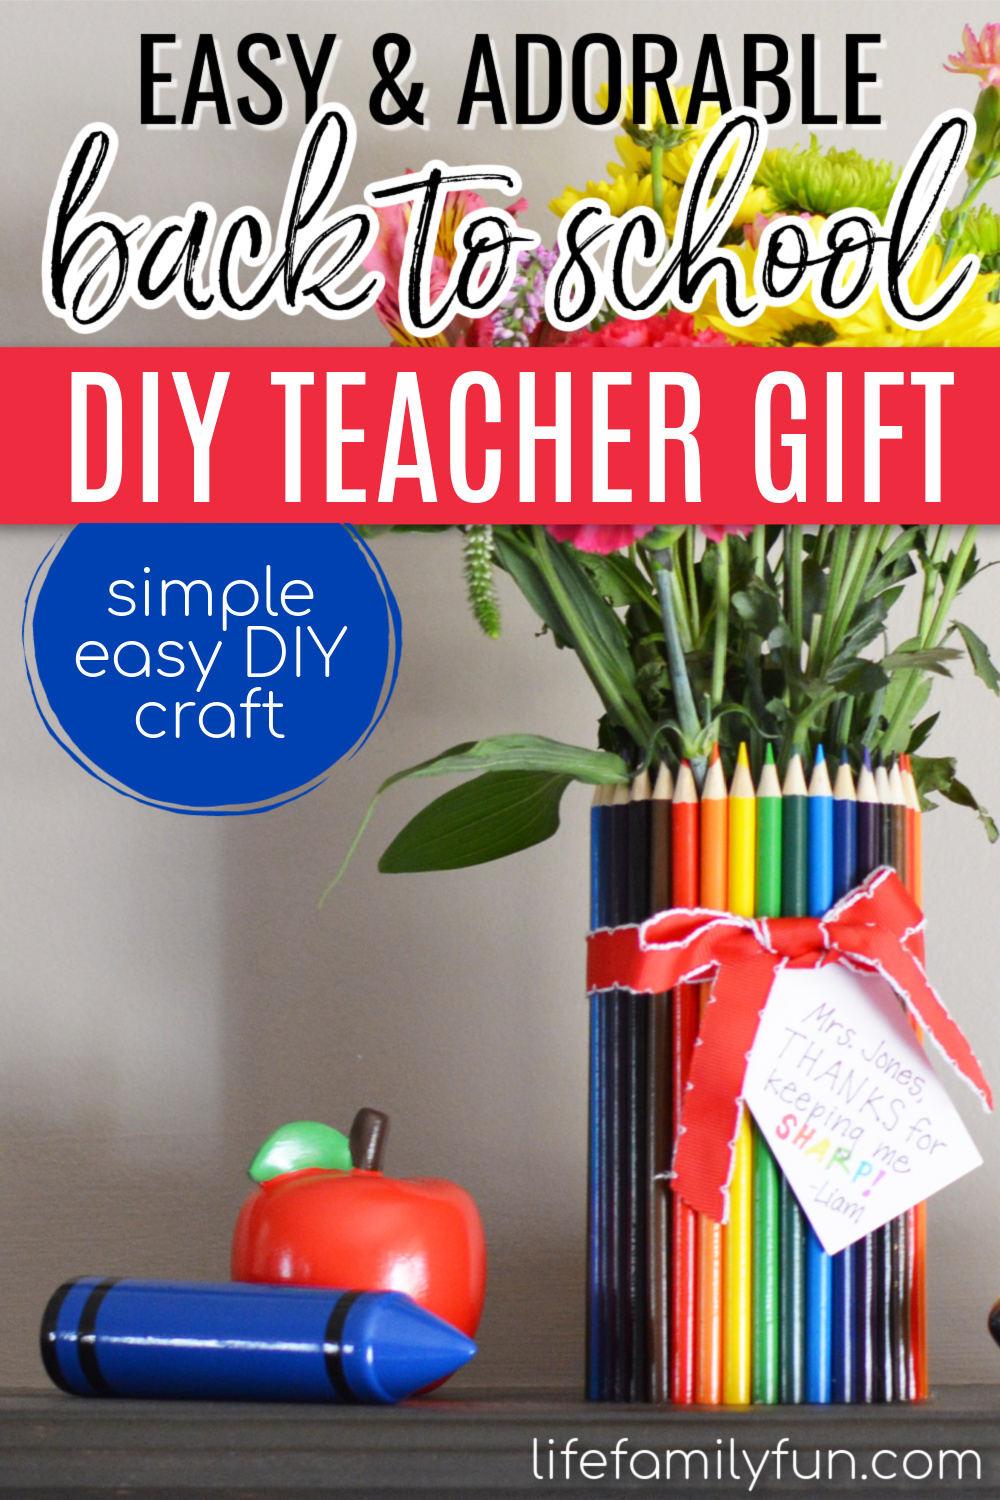 diy teacher gift with colored pencils, pinterest pin